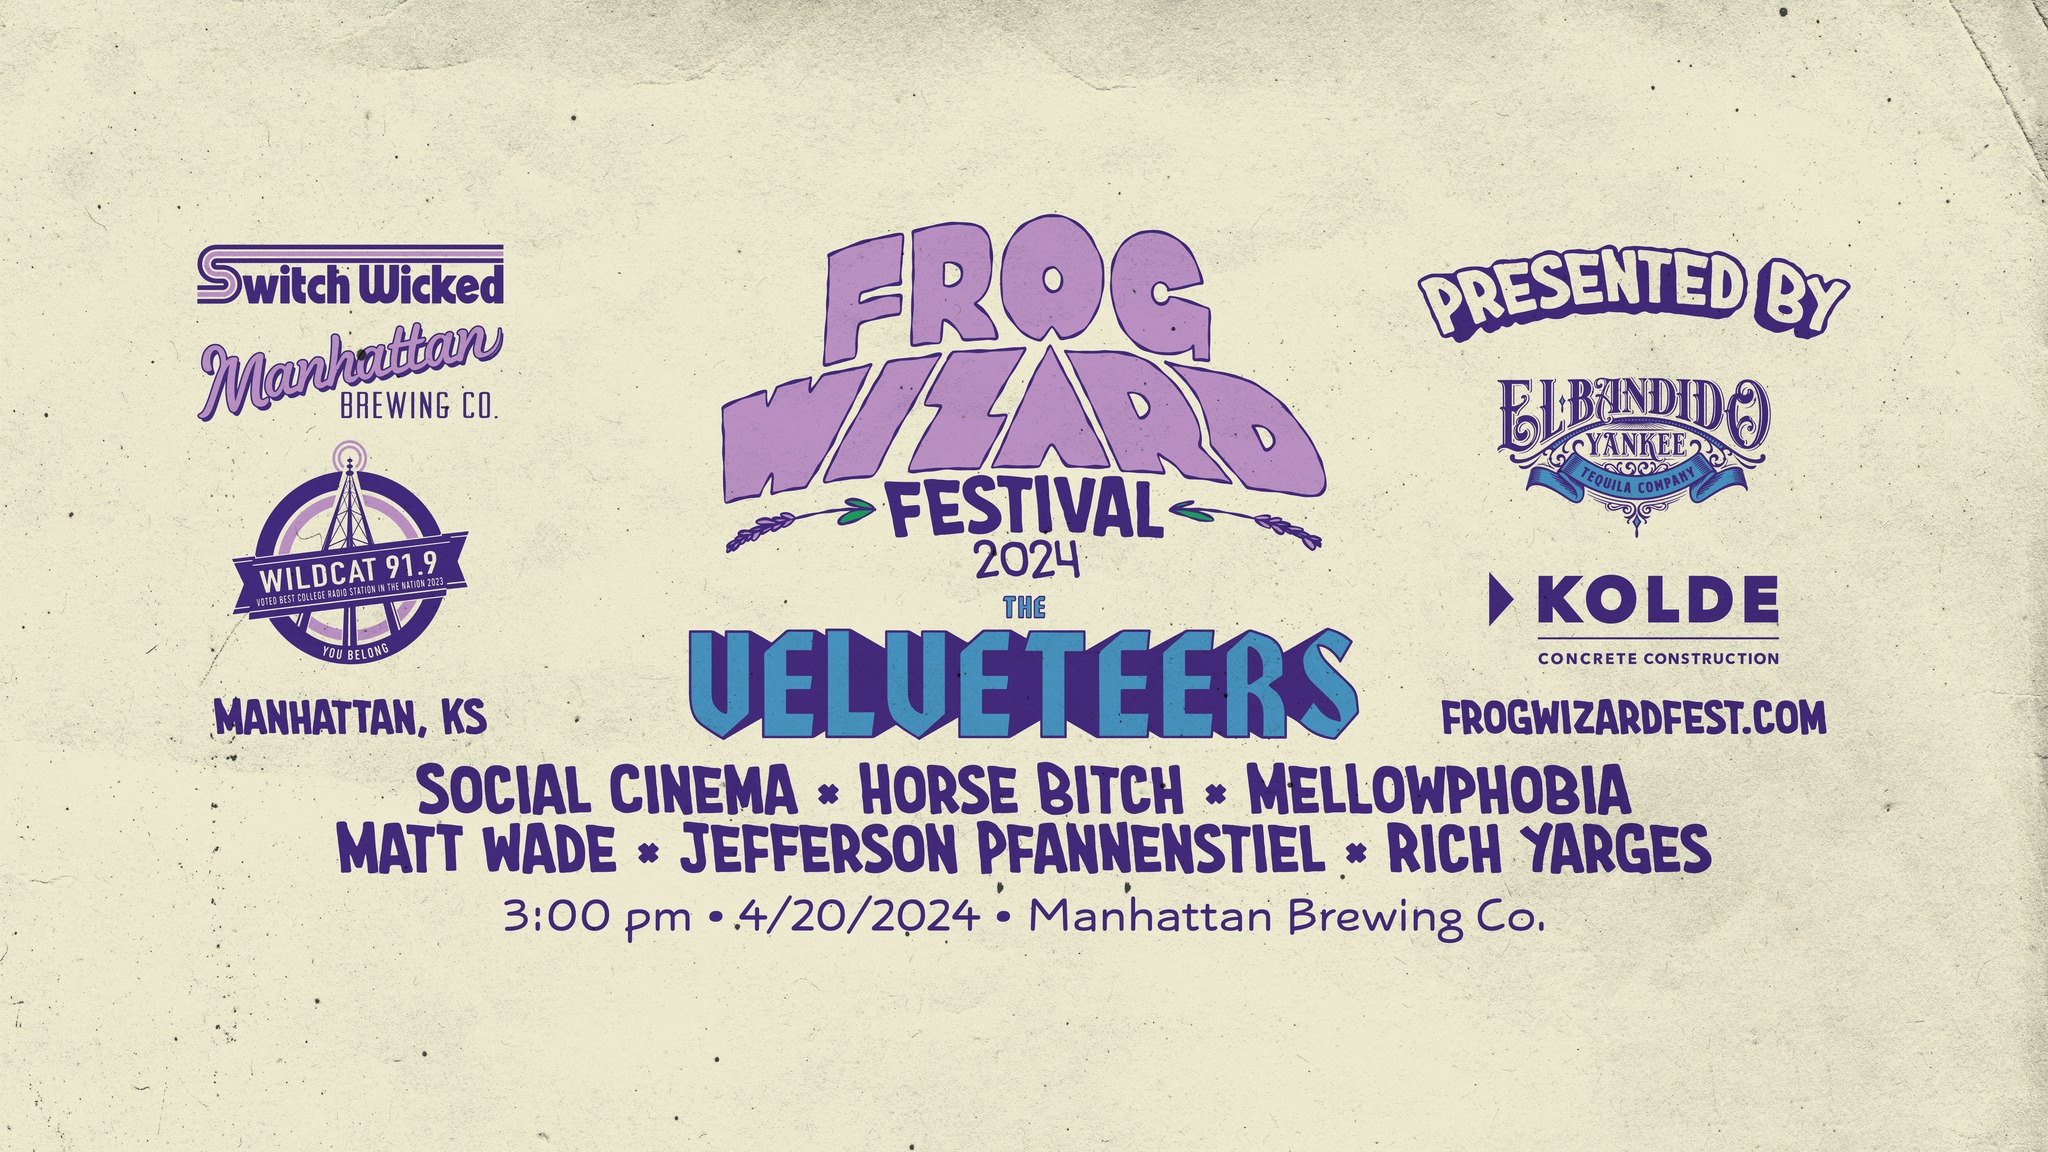 The Frog Wizard Musical Festival logo thats light purple with a cream background.